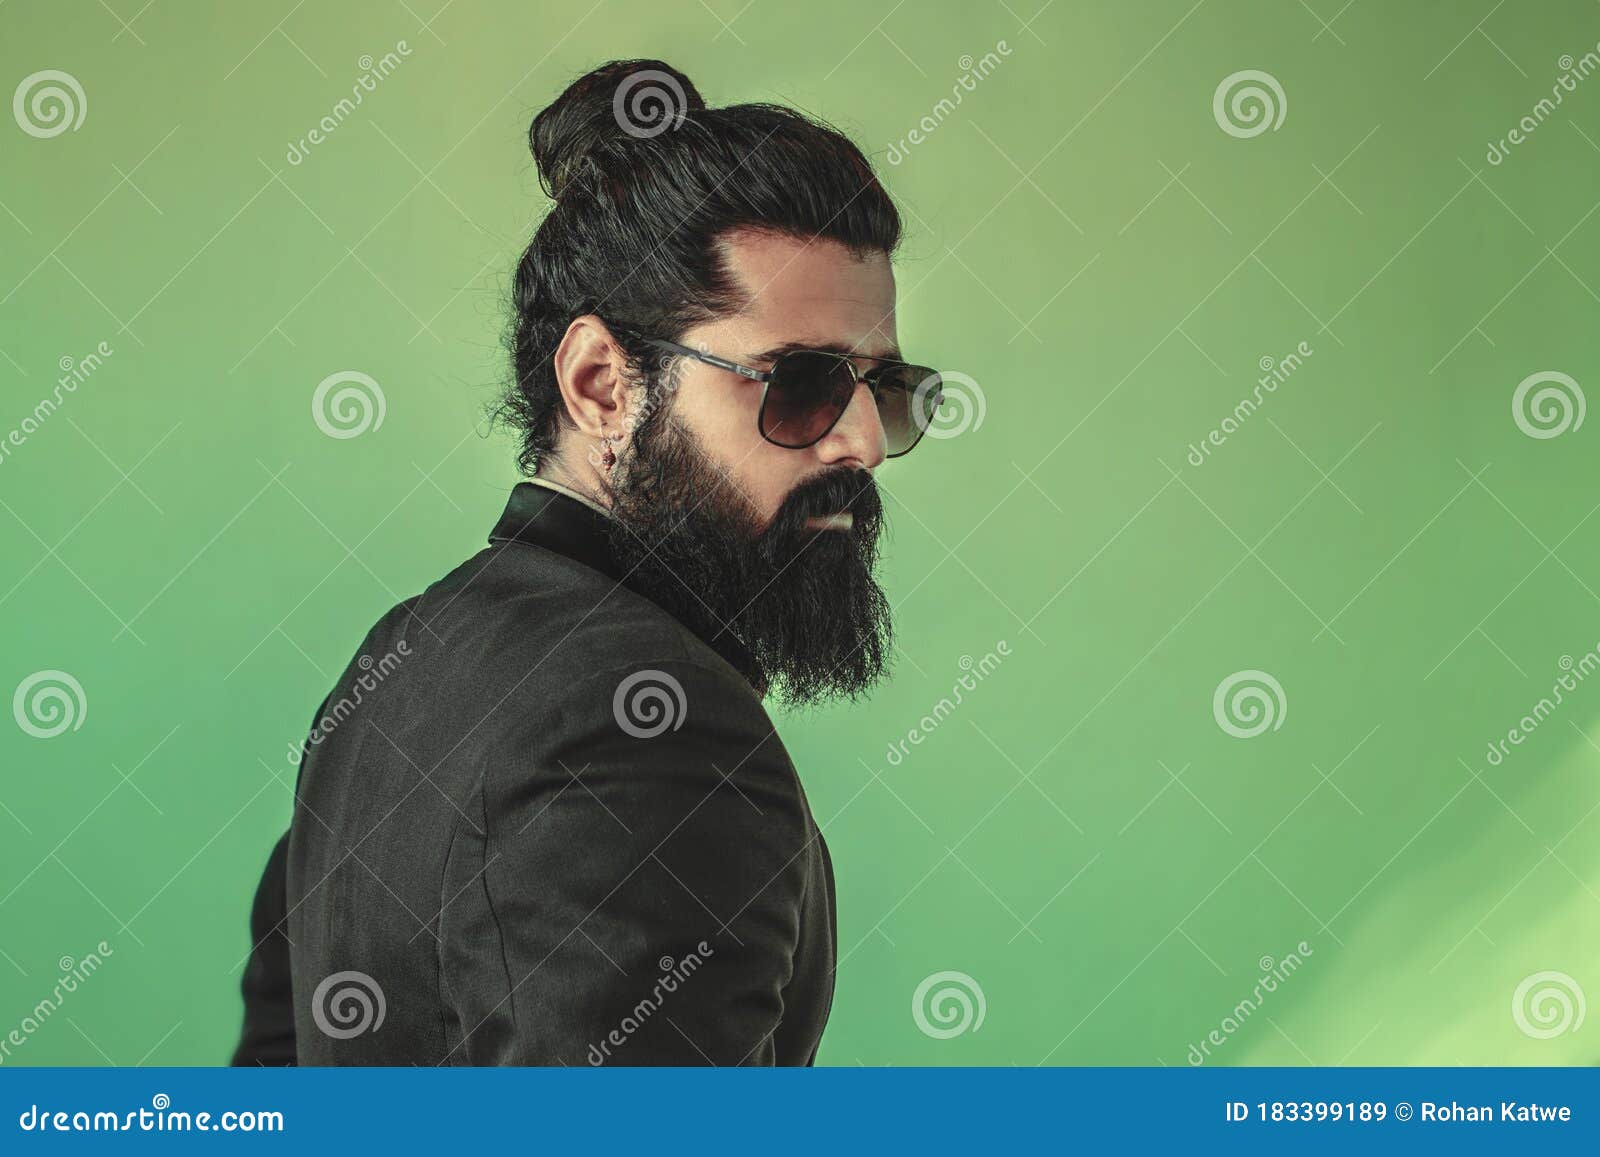 Side View of Handsome Bearded Man from the Back with a Man Bun Hairstyle  Posing in Studio Wearing a Suit and Sunglasses on Green Stock Image - Image  of handsome, long: 183399189